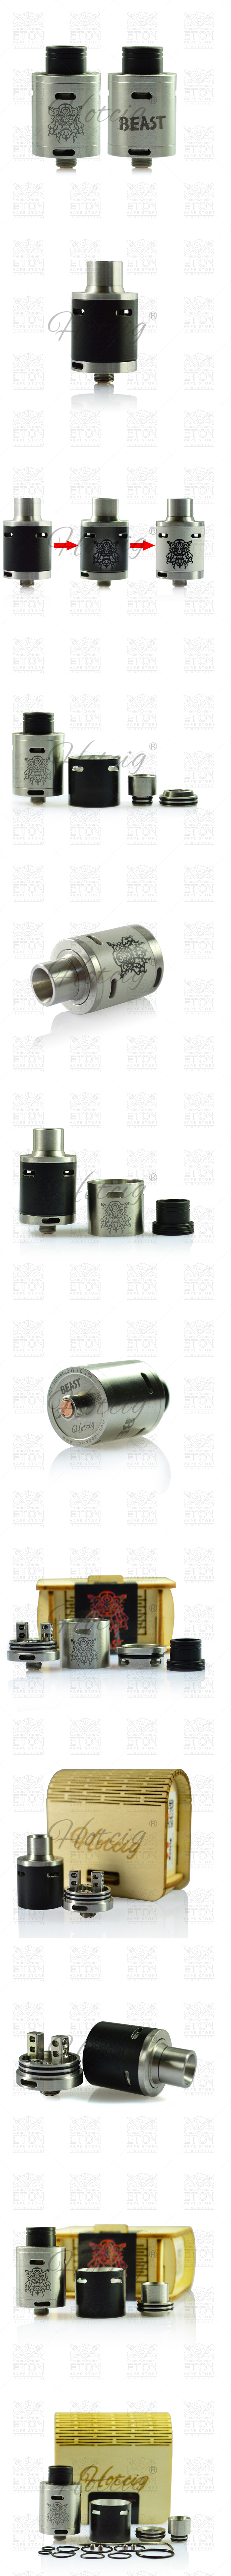 Authentic BEAST RDA By Hotcig